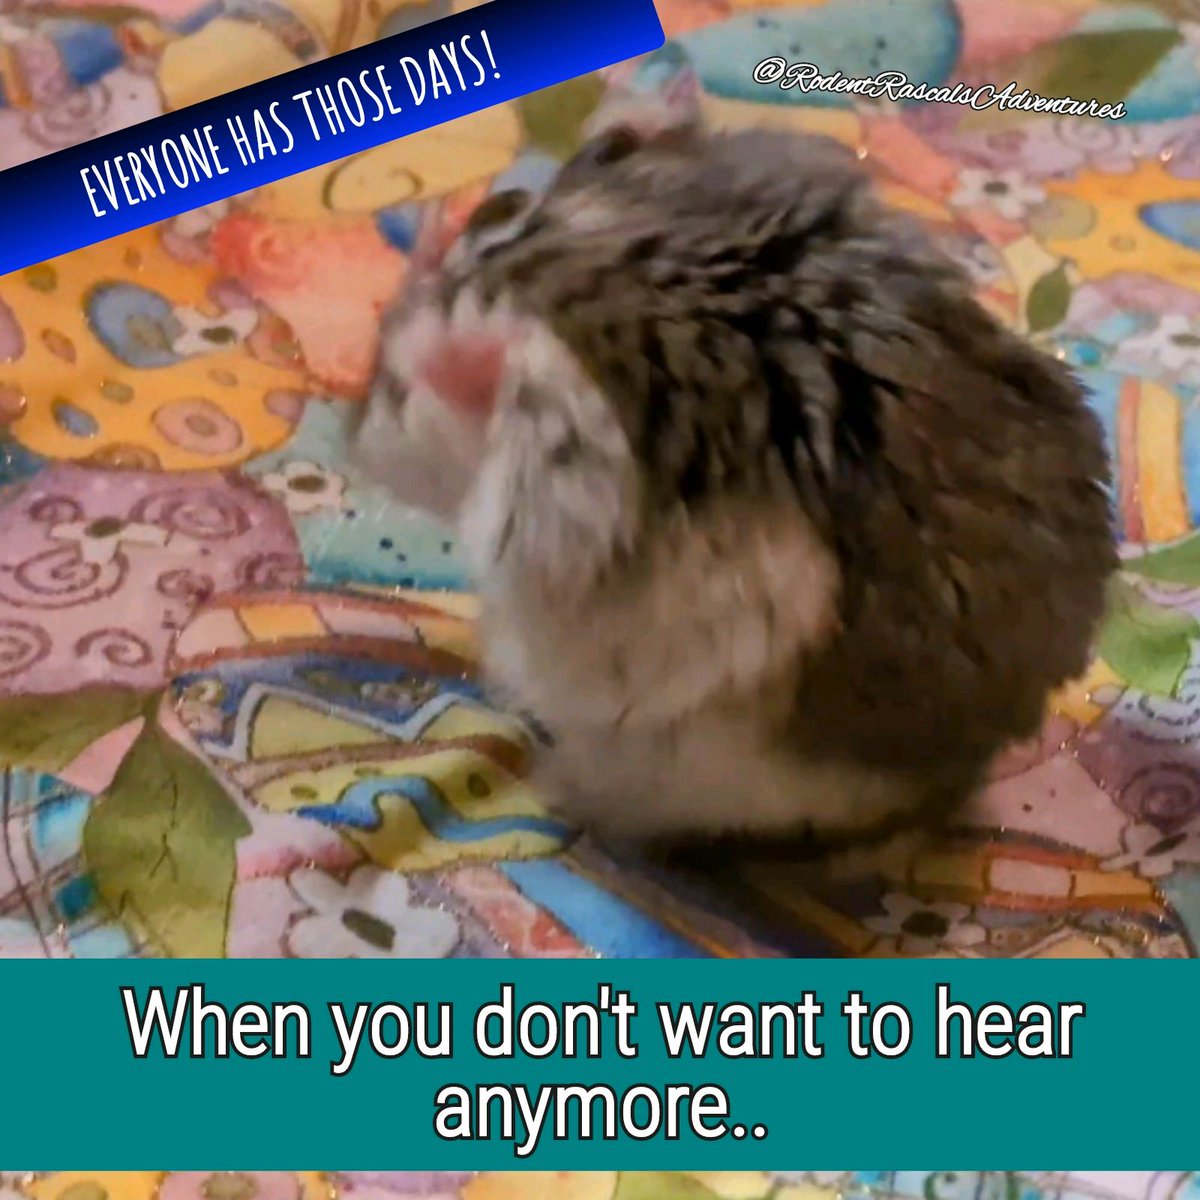 🐹🚫👂 Star hopes nobody is feeling this way today, but he wants YOU to know that if you are you're NOT alone!!! #enough #yourenotalone
❤️🐹🐽🐀💻⬇️
#RodentRascalsAdventures 

#hamster #SaturdayInspiration #hamsterdaily #pets #cutepet #cutehamster #hamstersoftheday #hamsterlife